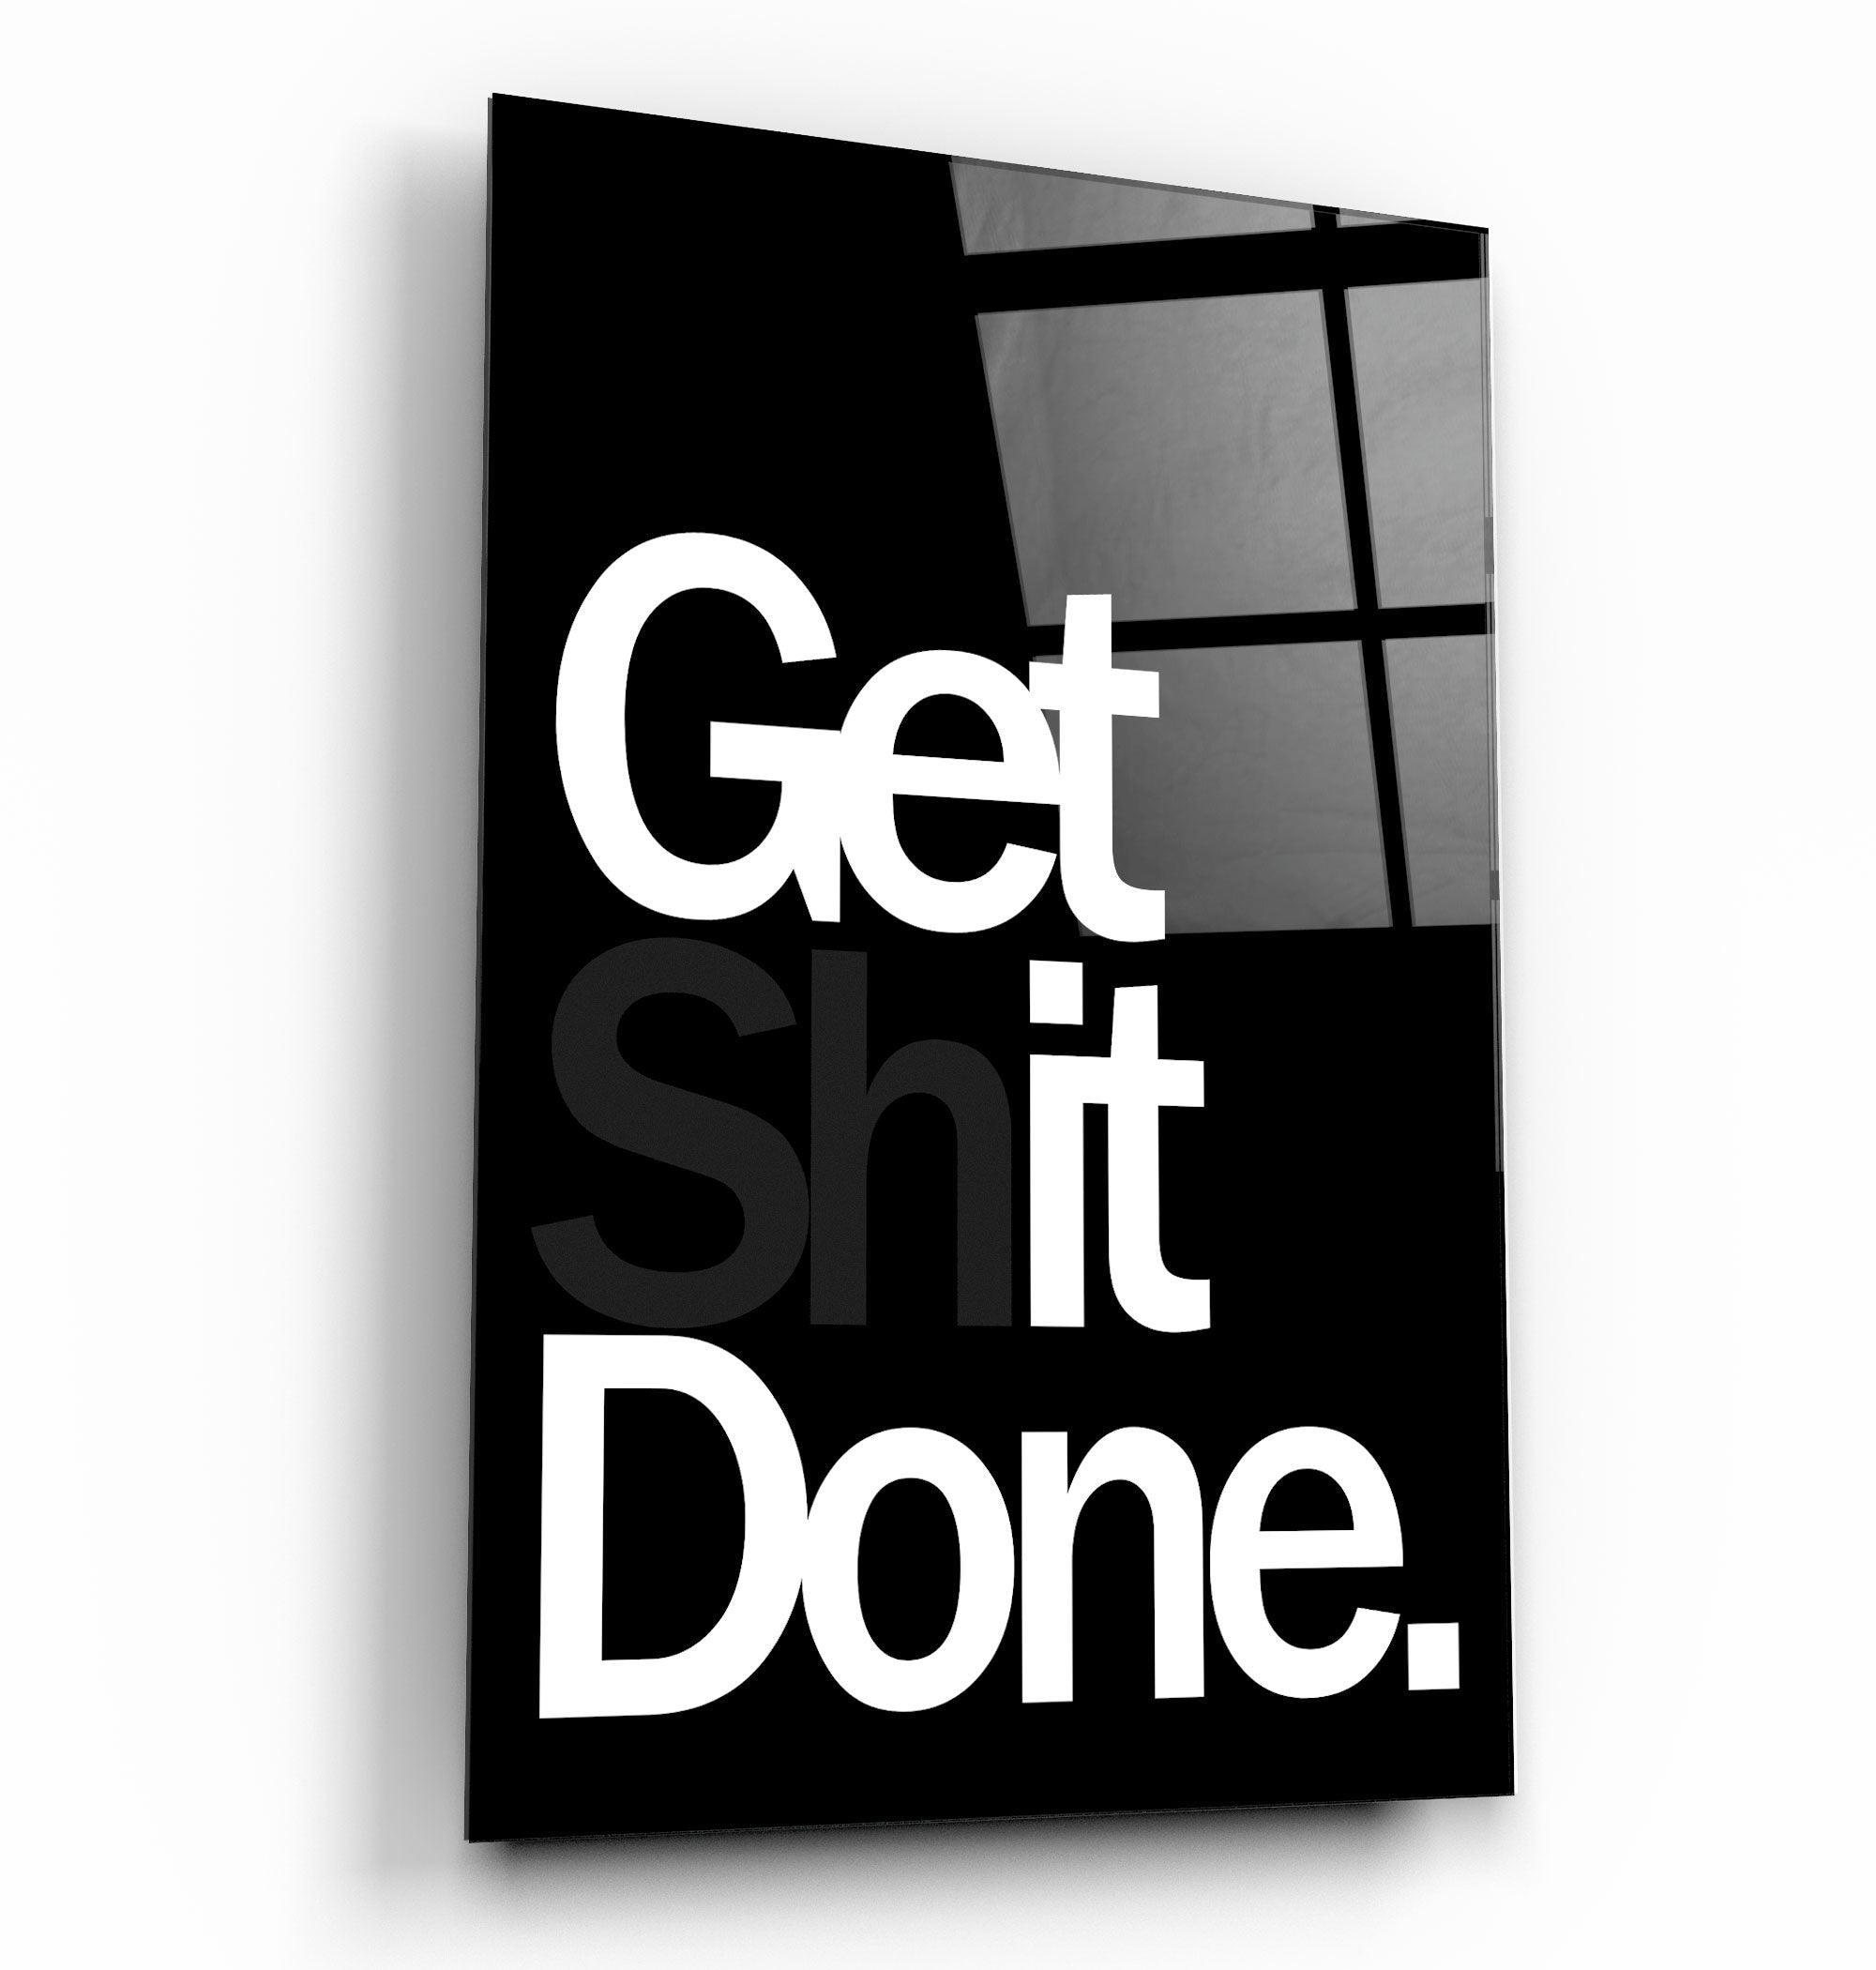 Get Sh(it) Done / Get Shit Done | Clock